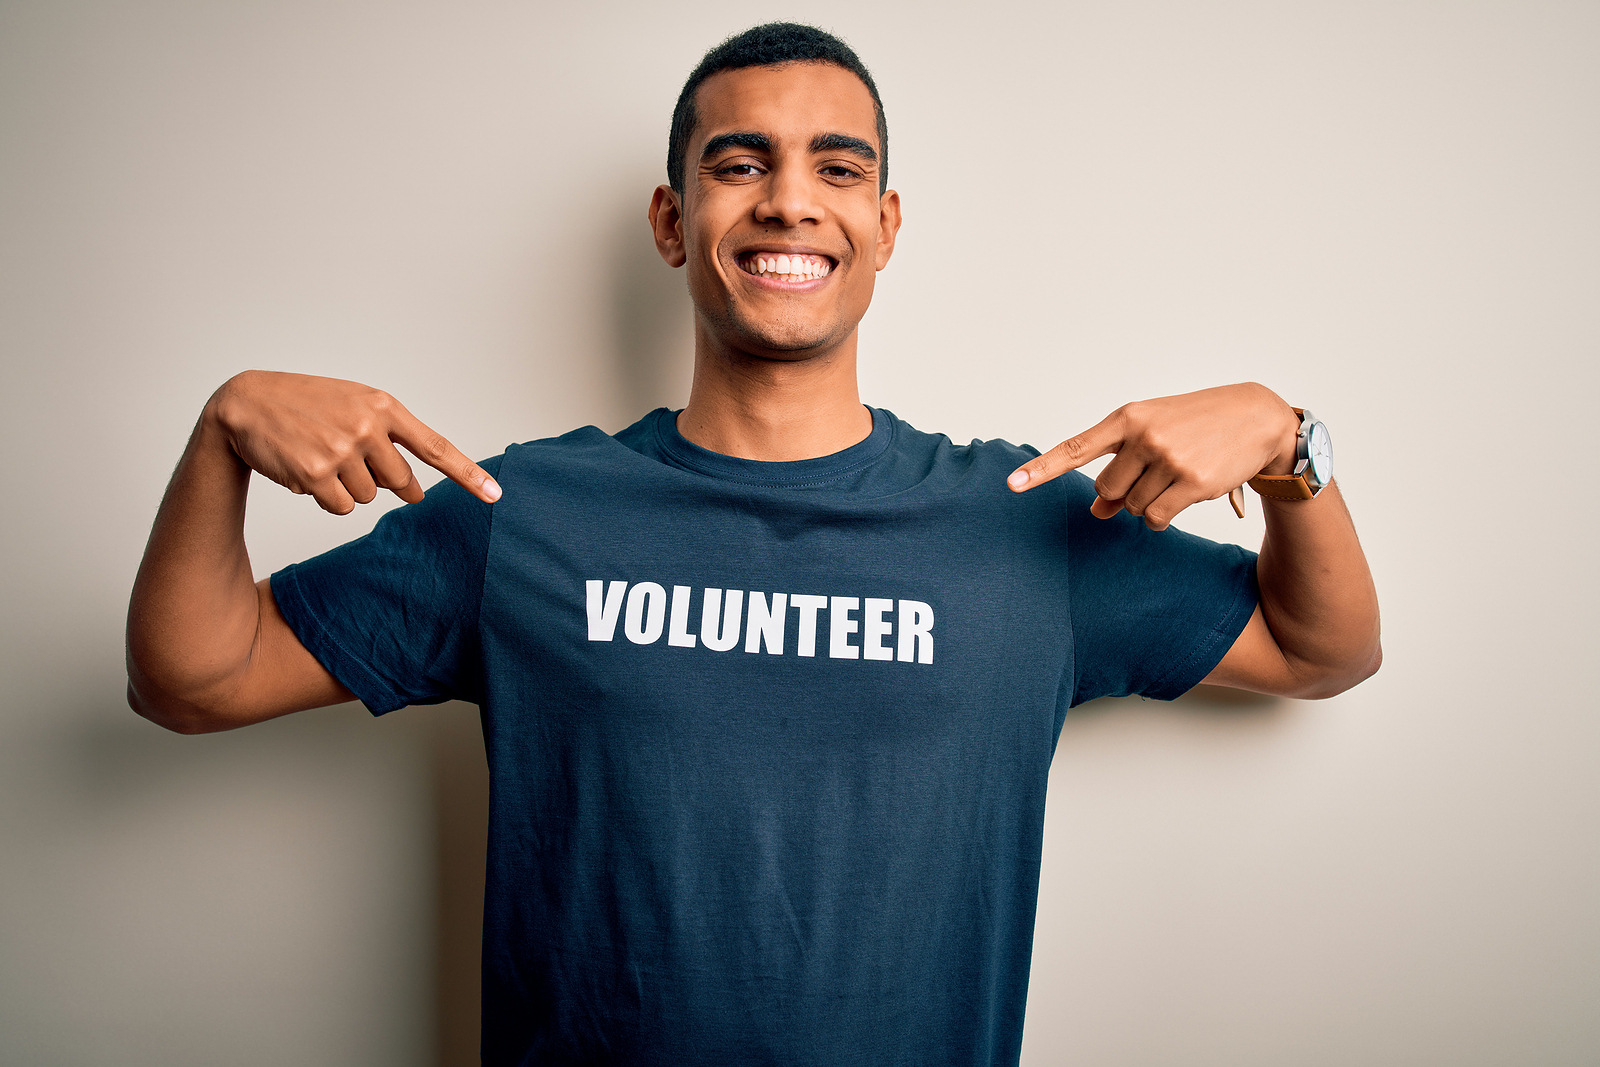 Young handsome African American man volunteering wearing t-shirt with volunteer message looking confident with smile on face, pointing oneself with fingers proud and happy.